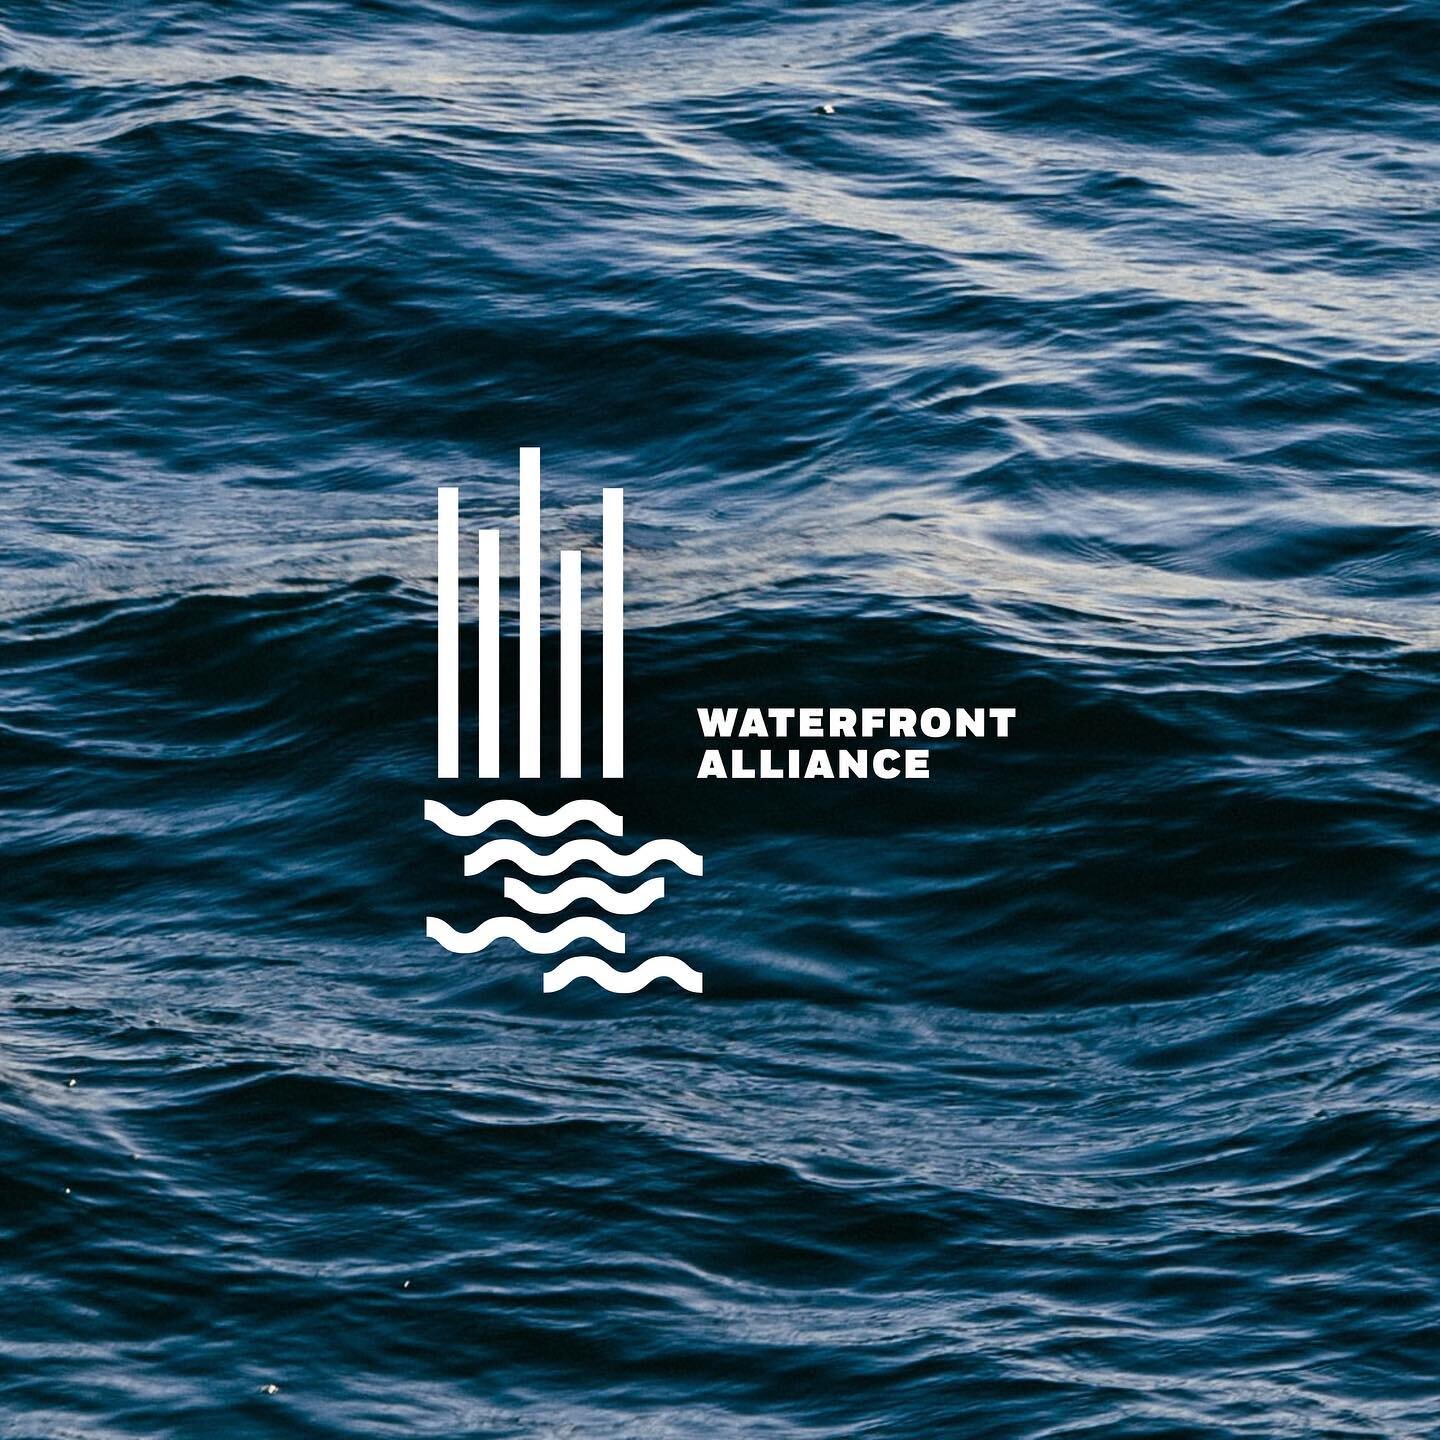 This #worldwaterday we are celebrating by showcasing our client @waterfrontalliance. They are a non-profit organization who inspires and effects resilient, revitalized, and accessible coastlines for all communities.
.
.
.
#coastalresilience #environm